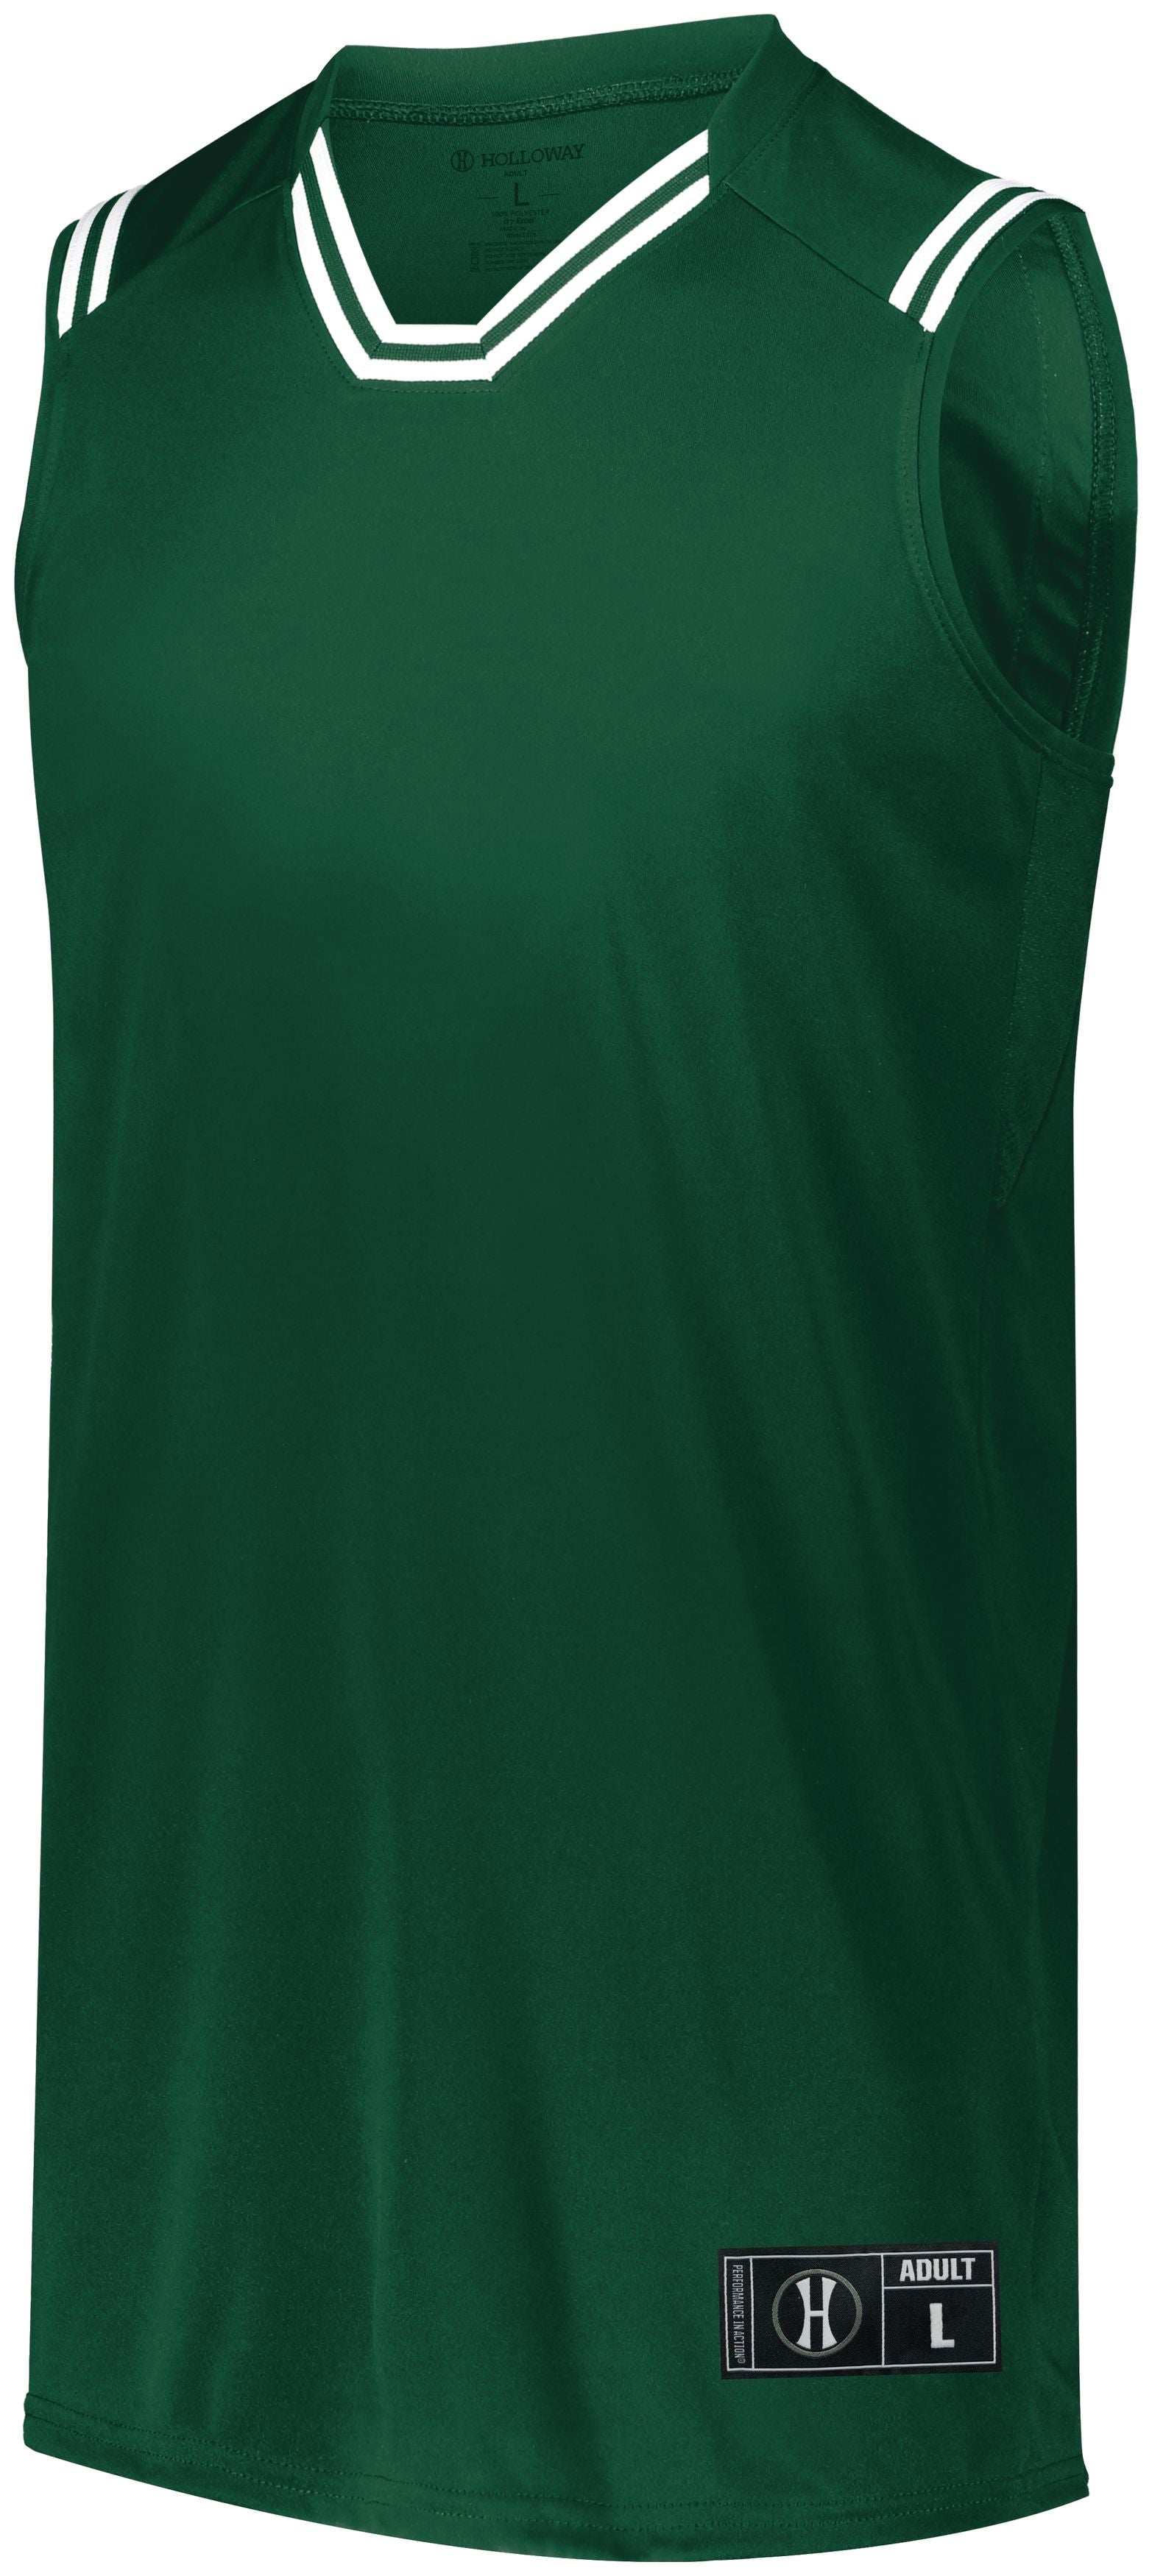 Holloway Retro Basketball Jersey in Forest/White  -Part of the Adult, Adult-Jersey, Basketball, Holloway, Shirts, All-Sports, All-Sports-1 product lines at KanaleyCreations.com